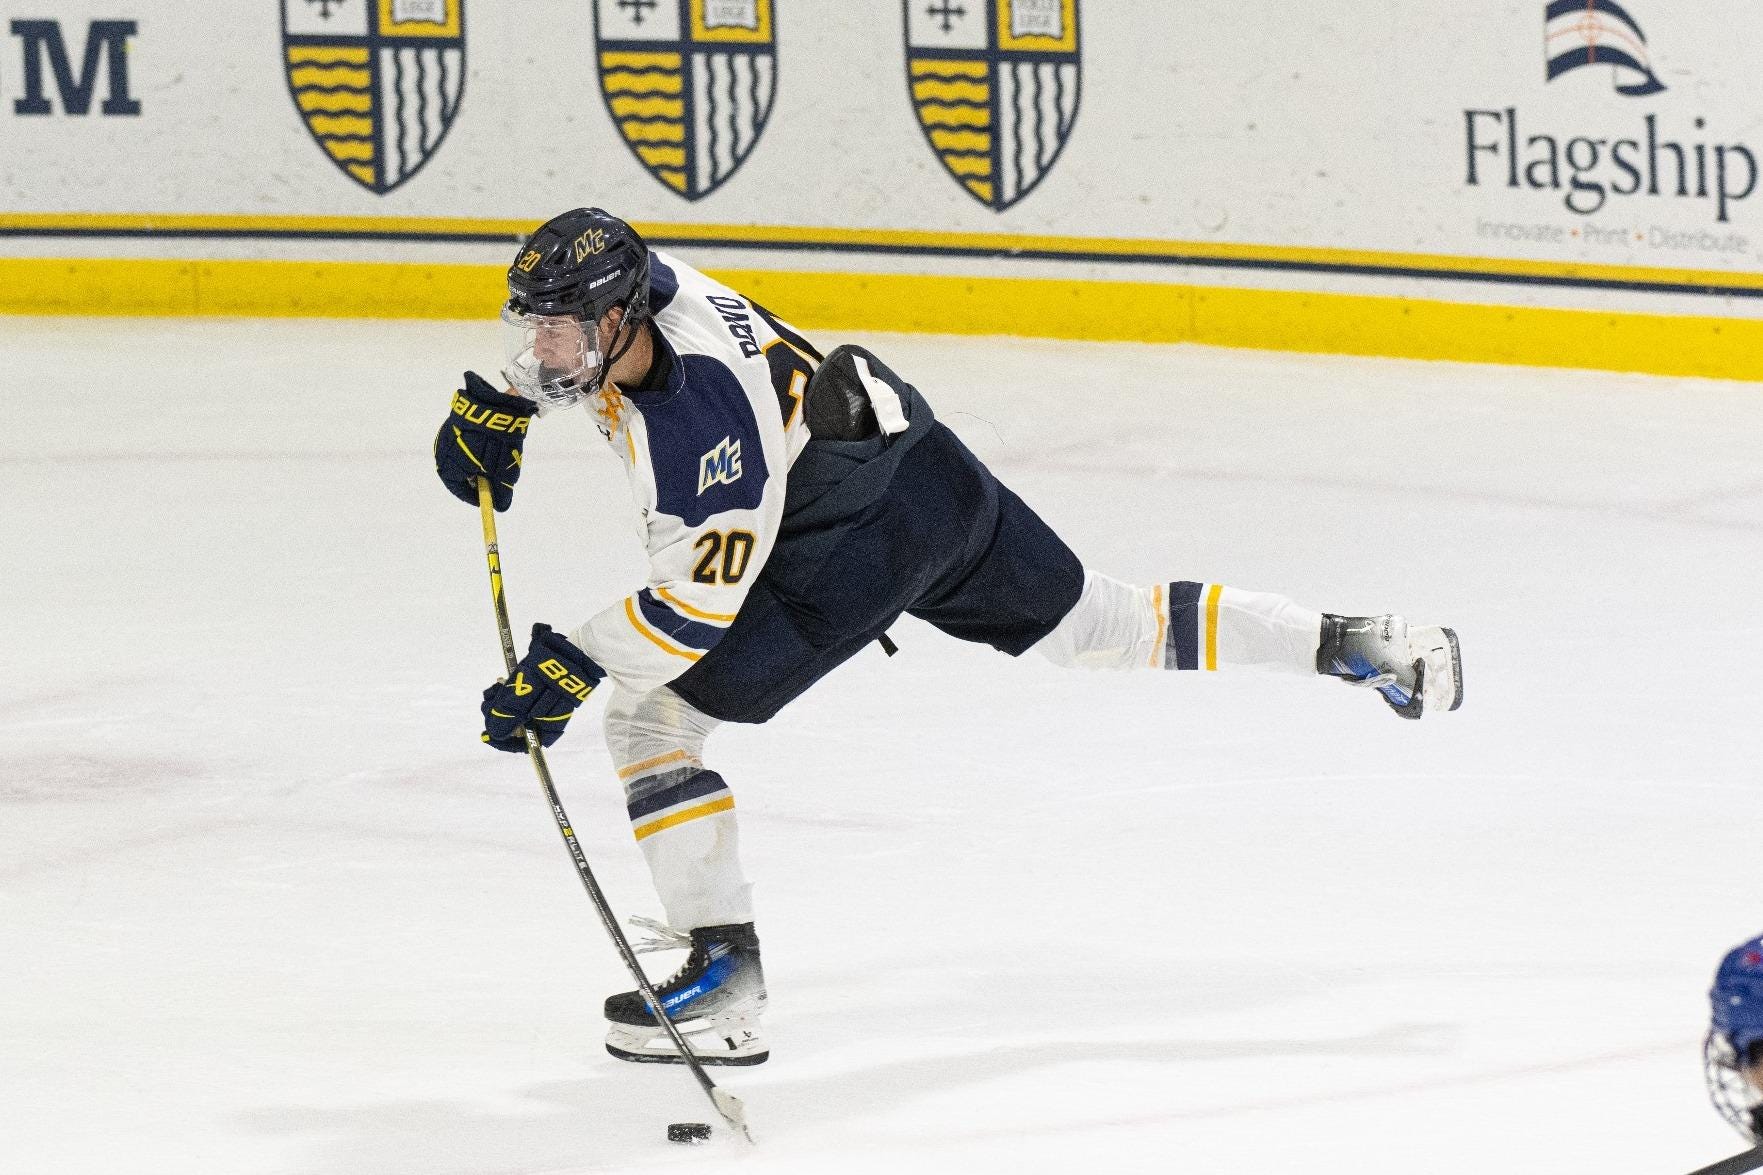 More injuries pile up for Merrimack in loss to UMass